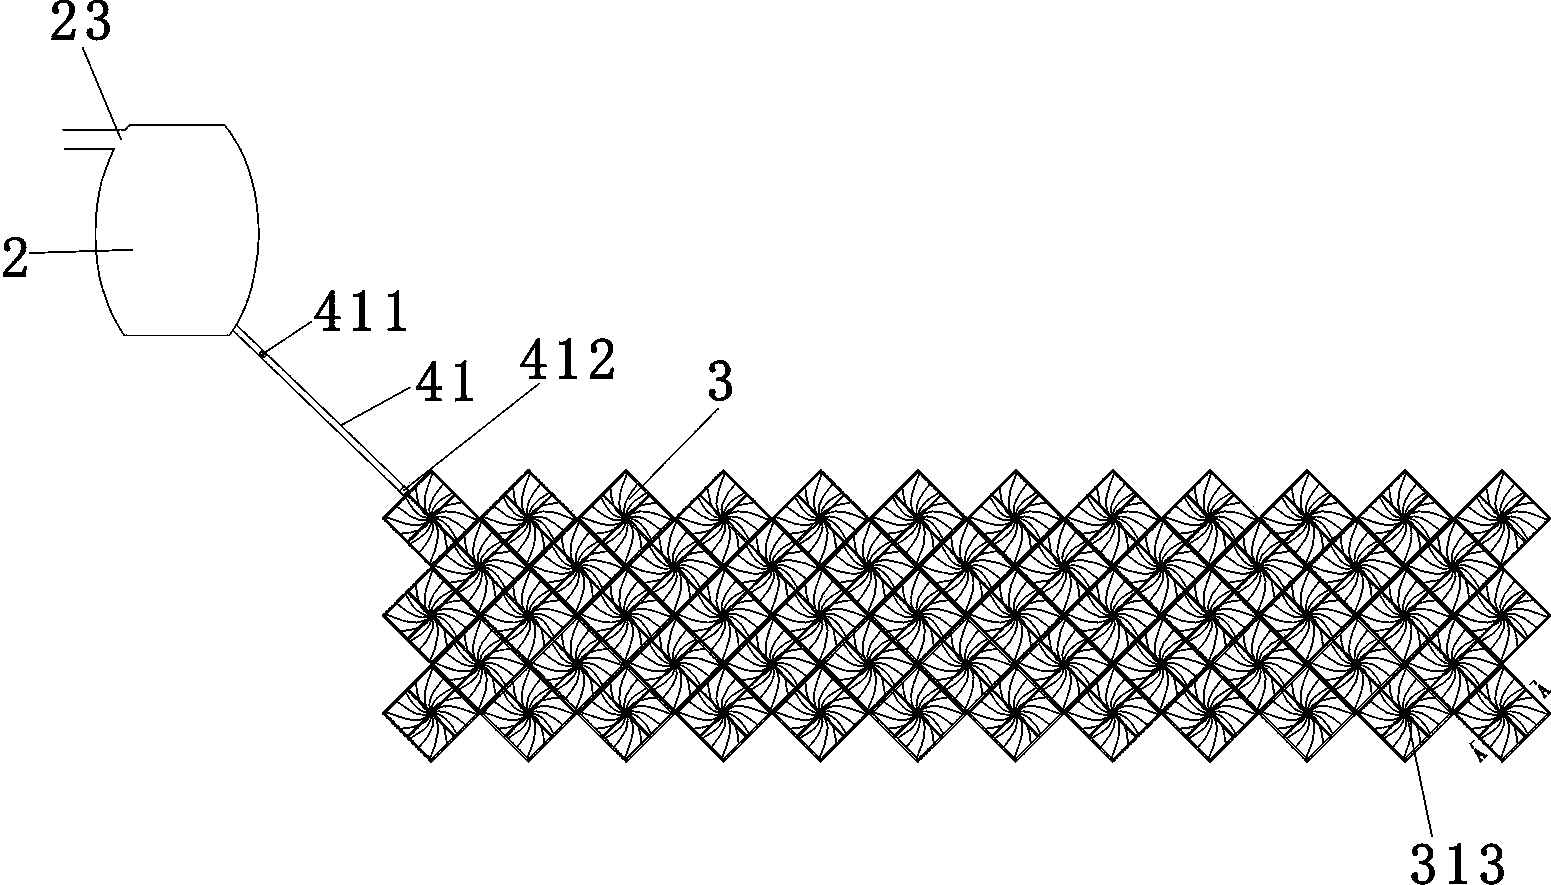 Vegetation recovery system and method for vegetation recovery with system